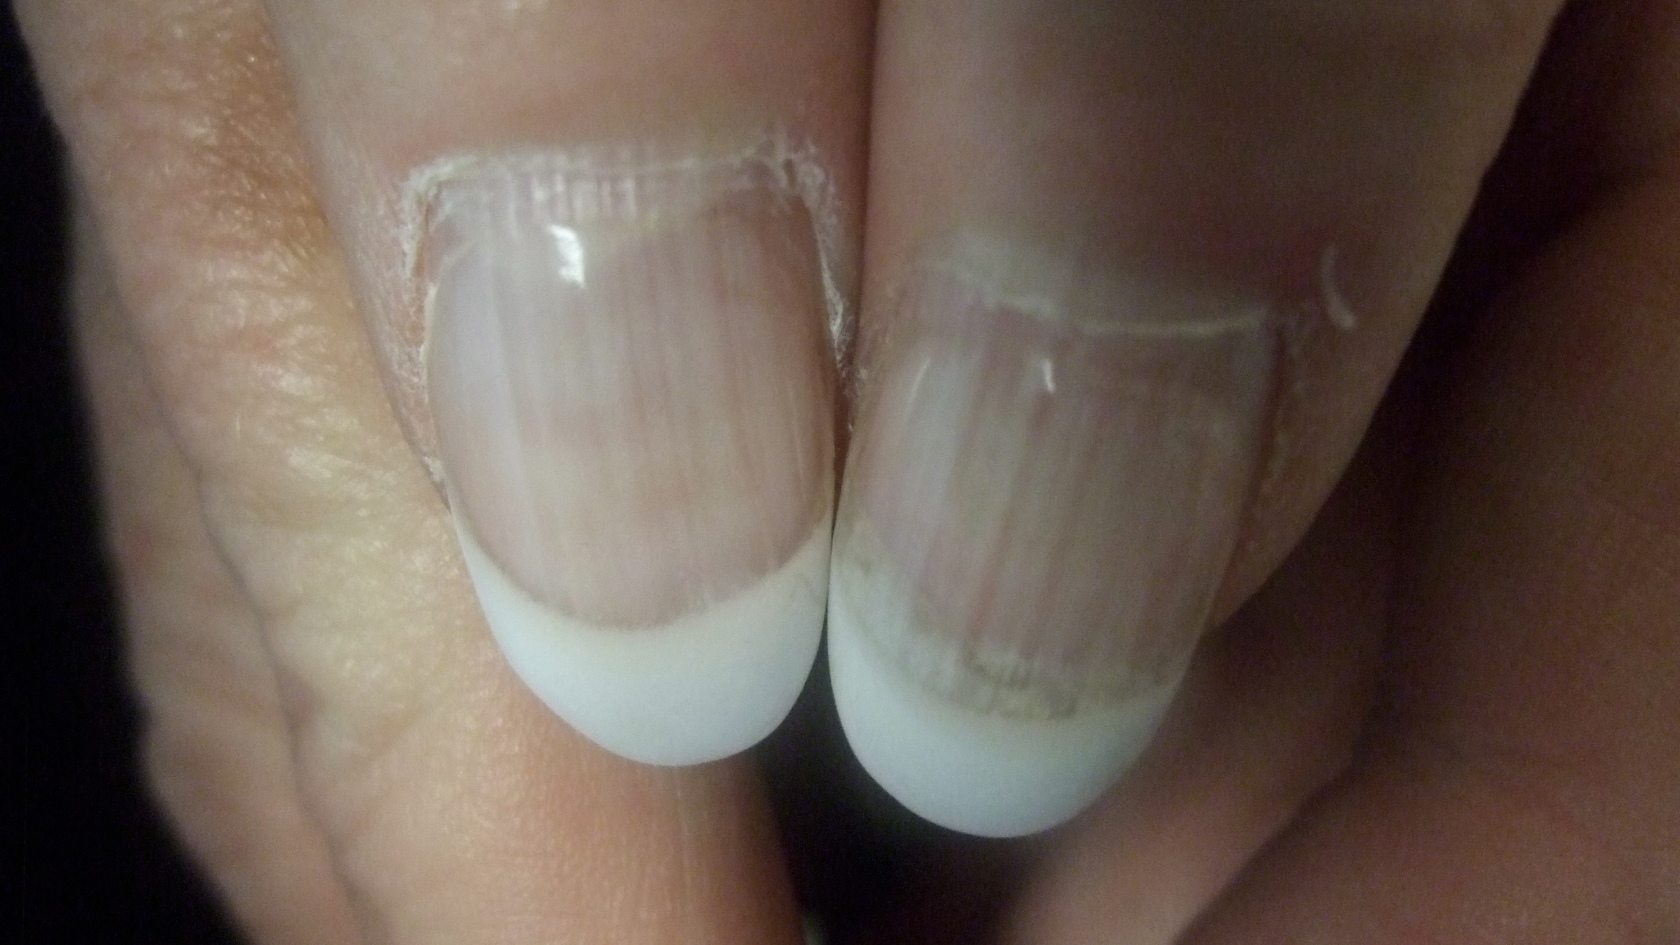 Transverse Lines of the Nails | The American Journal of Medicine Blog